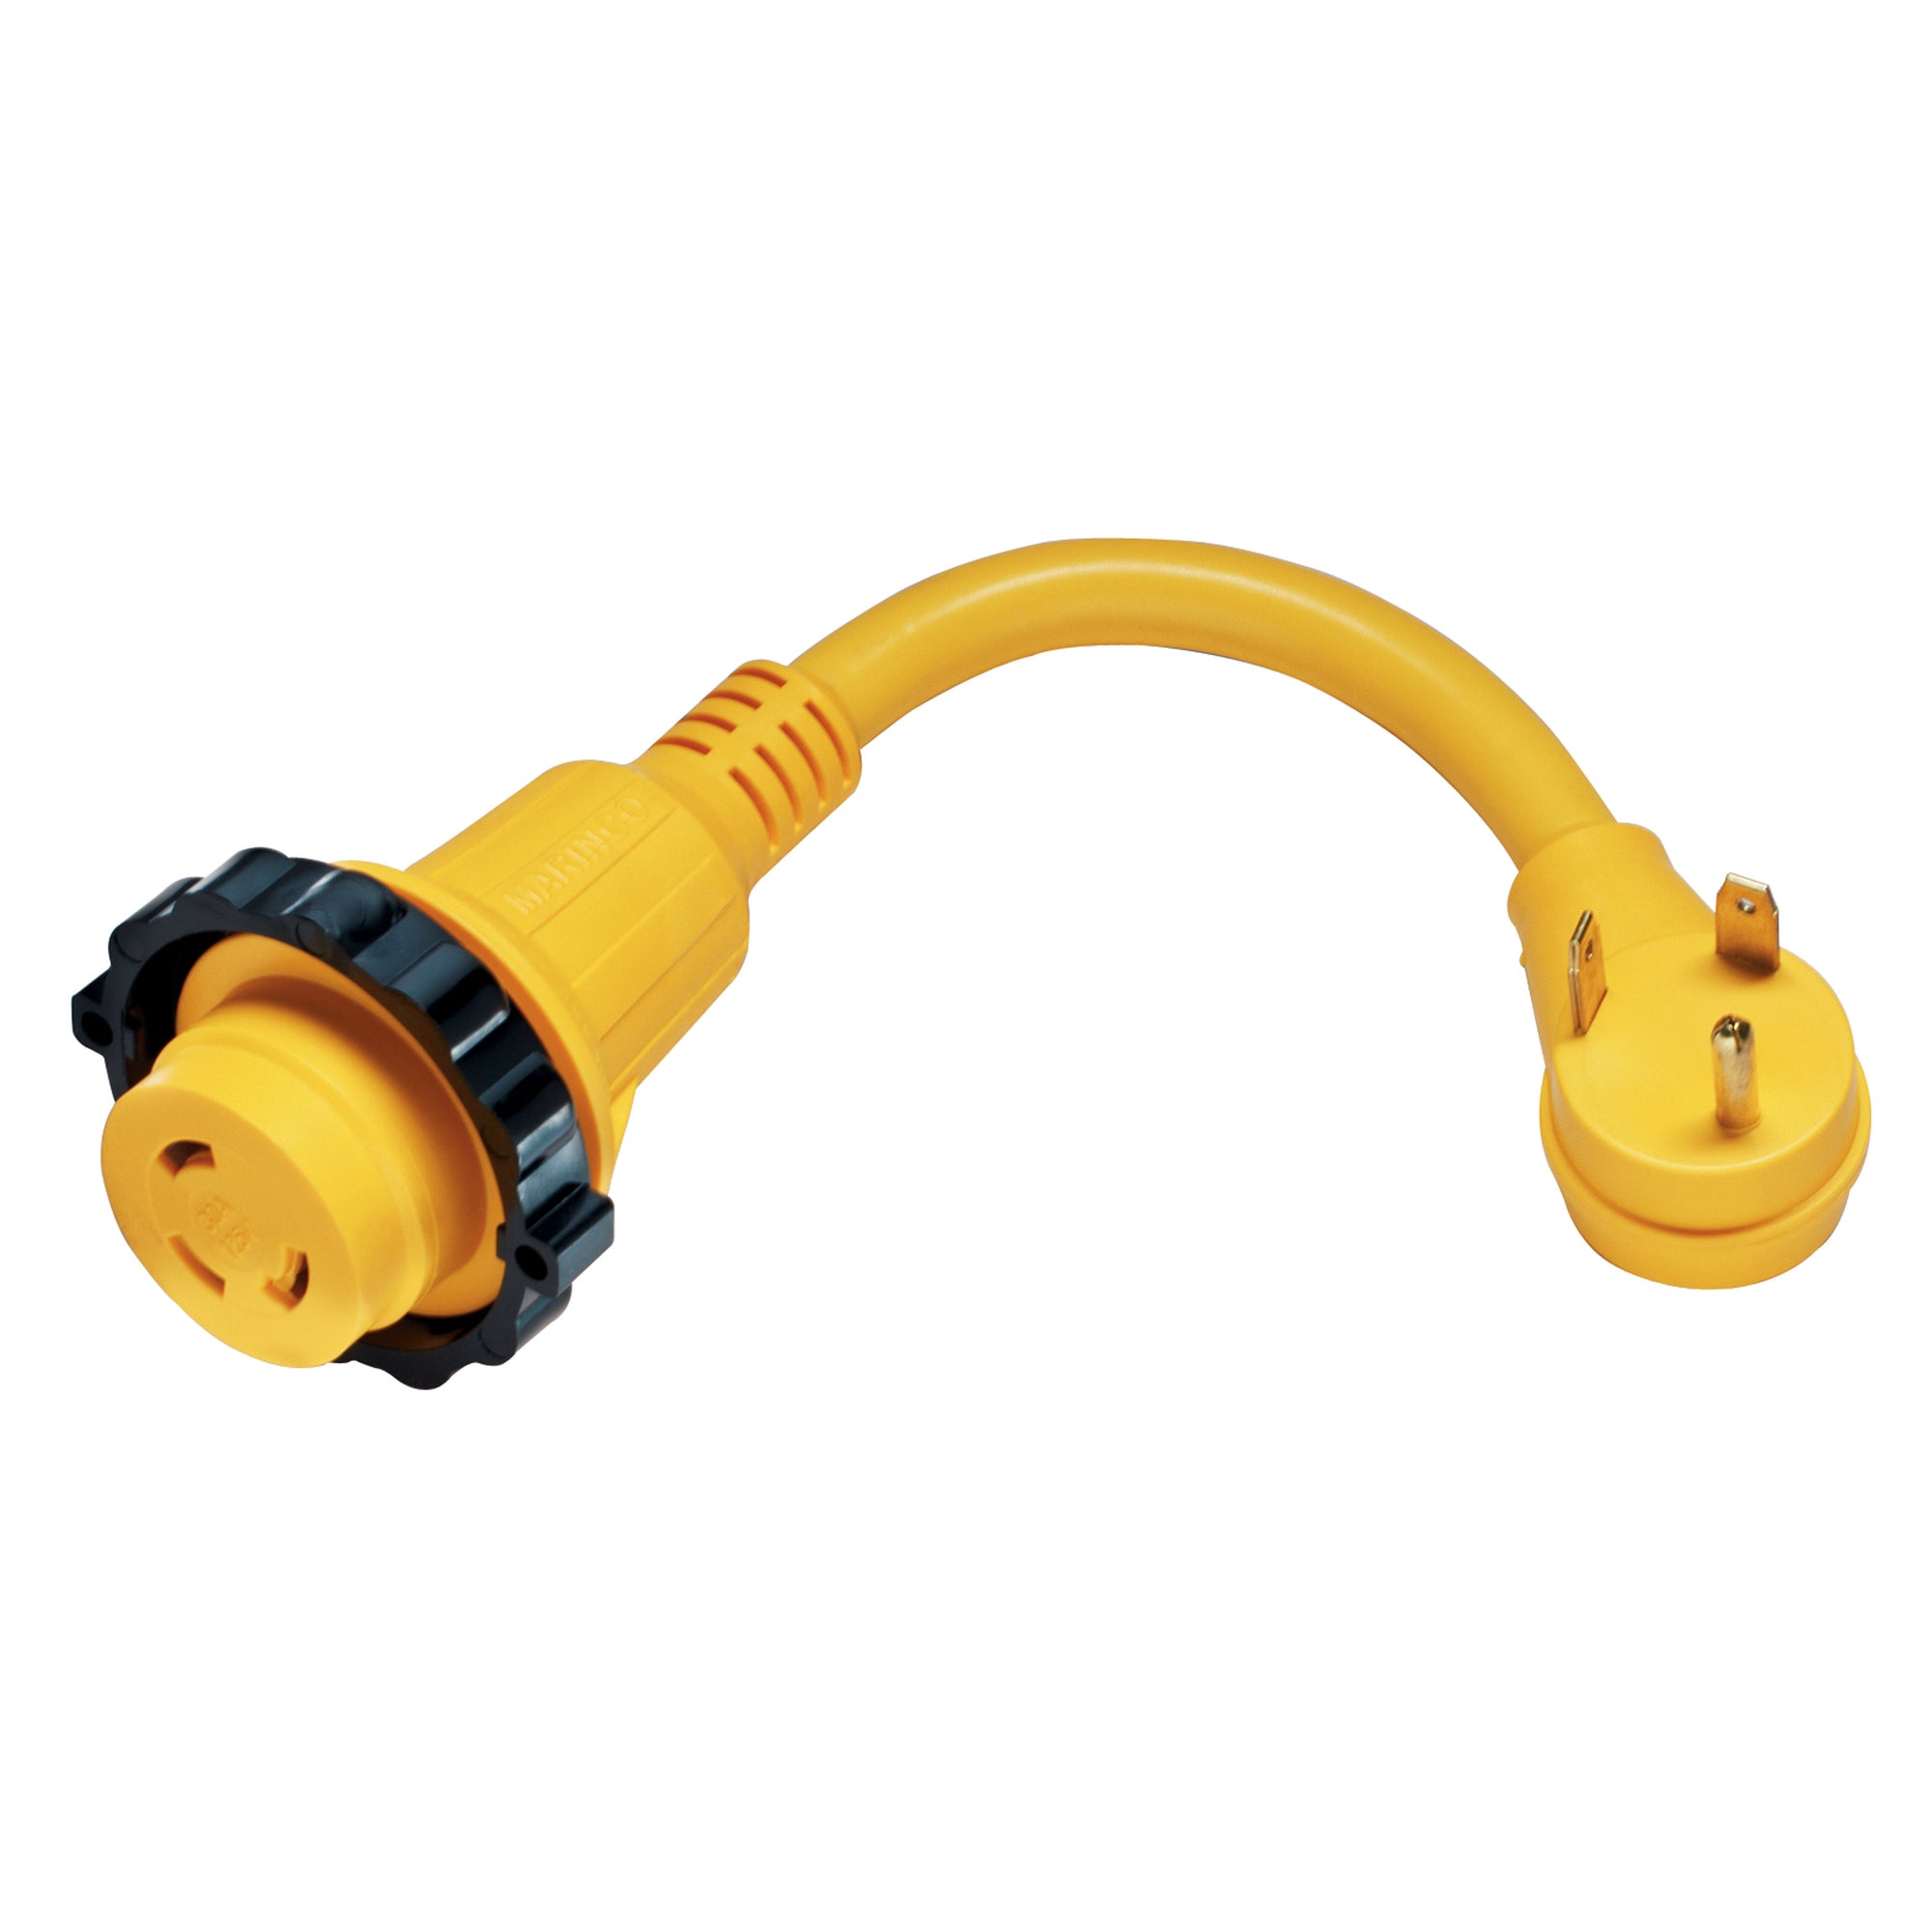 ParkPower 1PCMRV - Pigtail Adapter - 30A Male to 30A Female, 18"